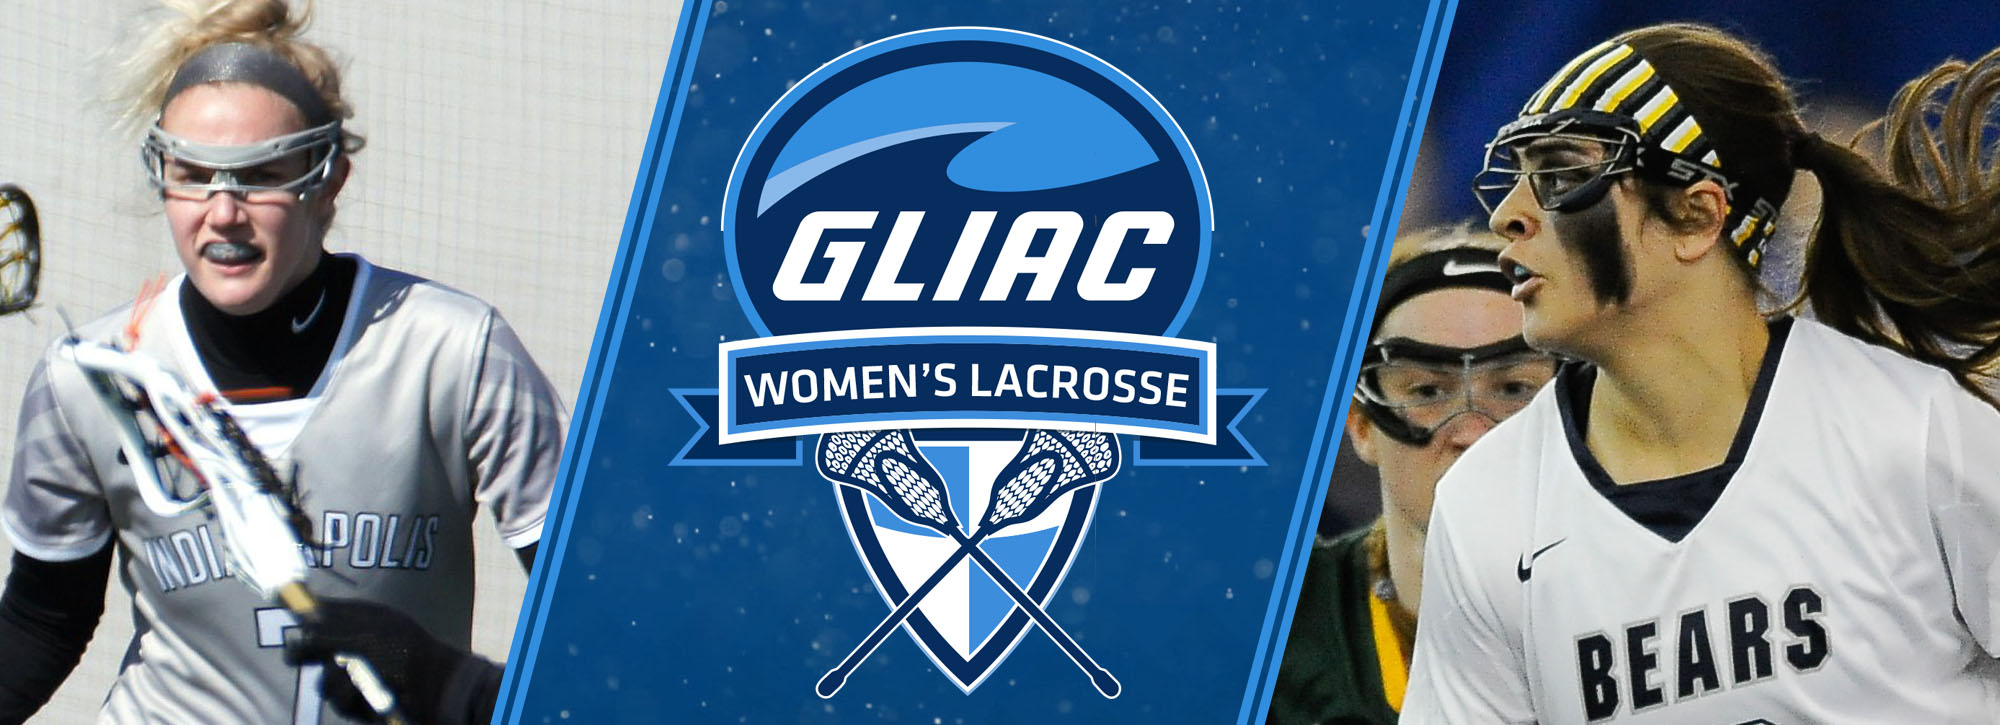 CSP's Boyce and UIndy's Wagner garner lacrosse weekly awards